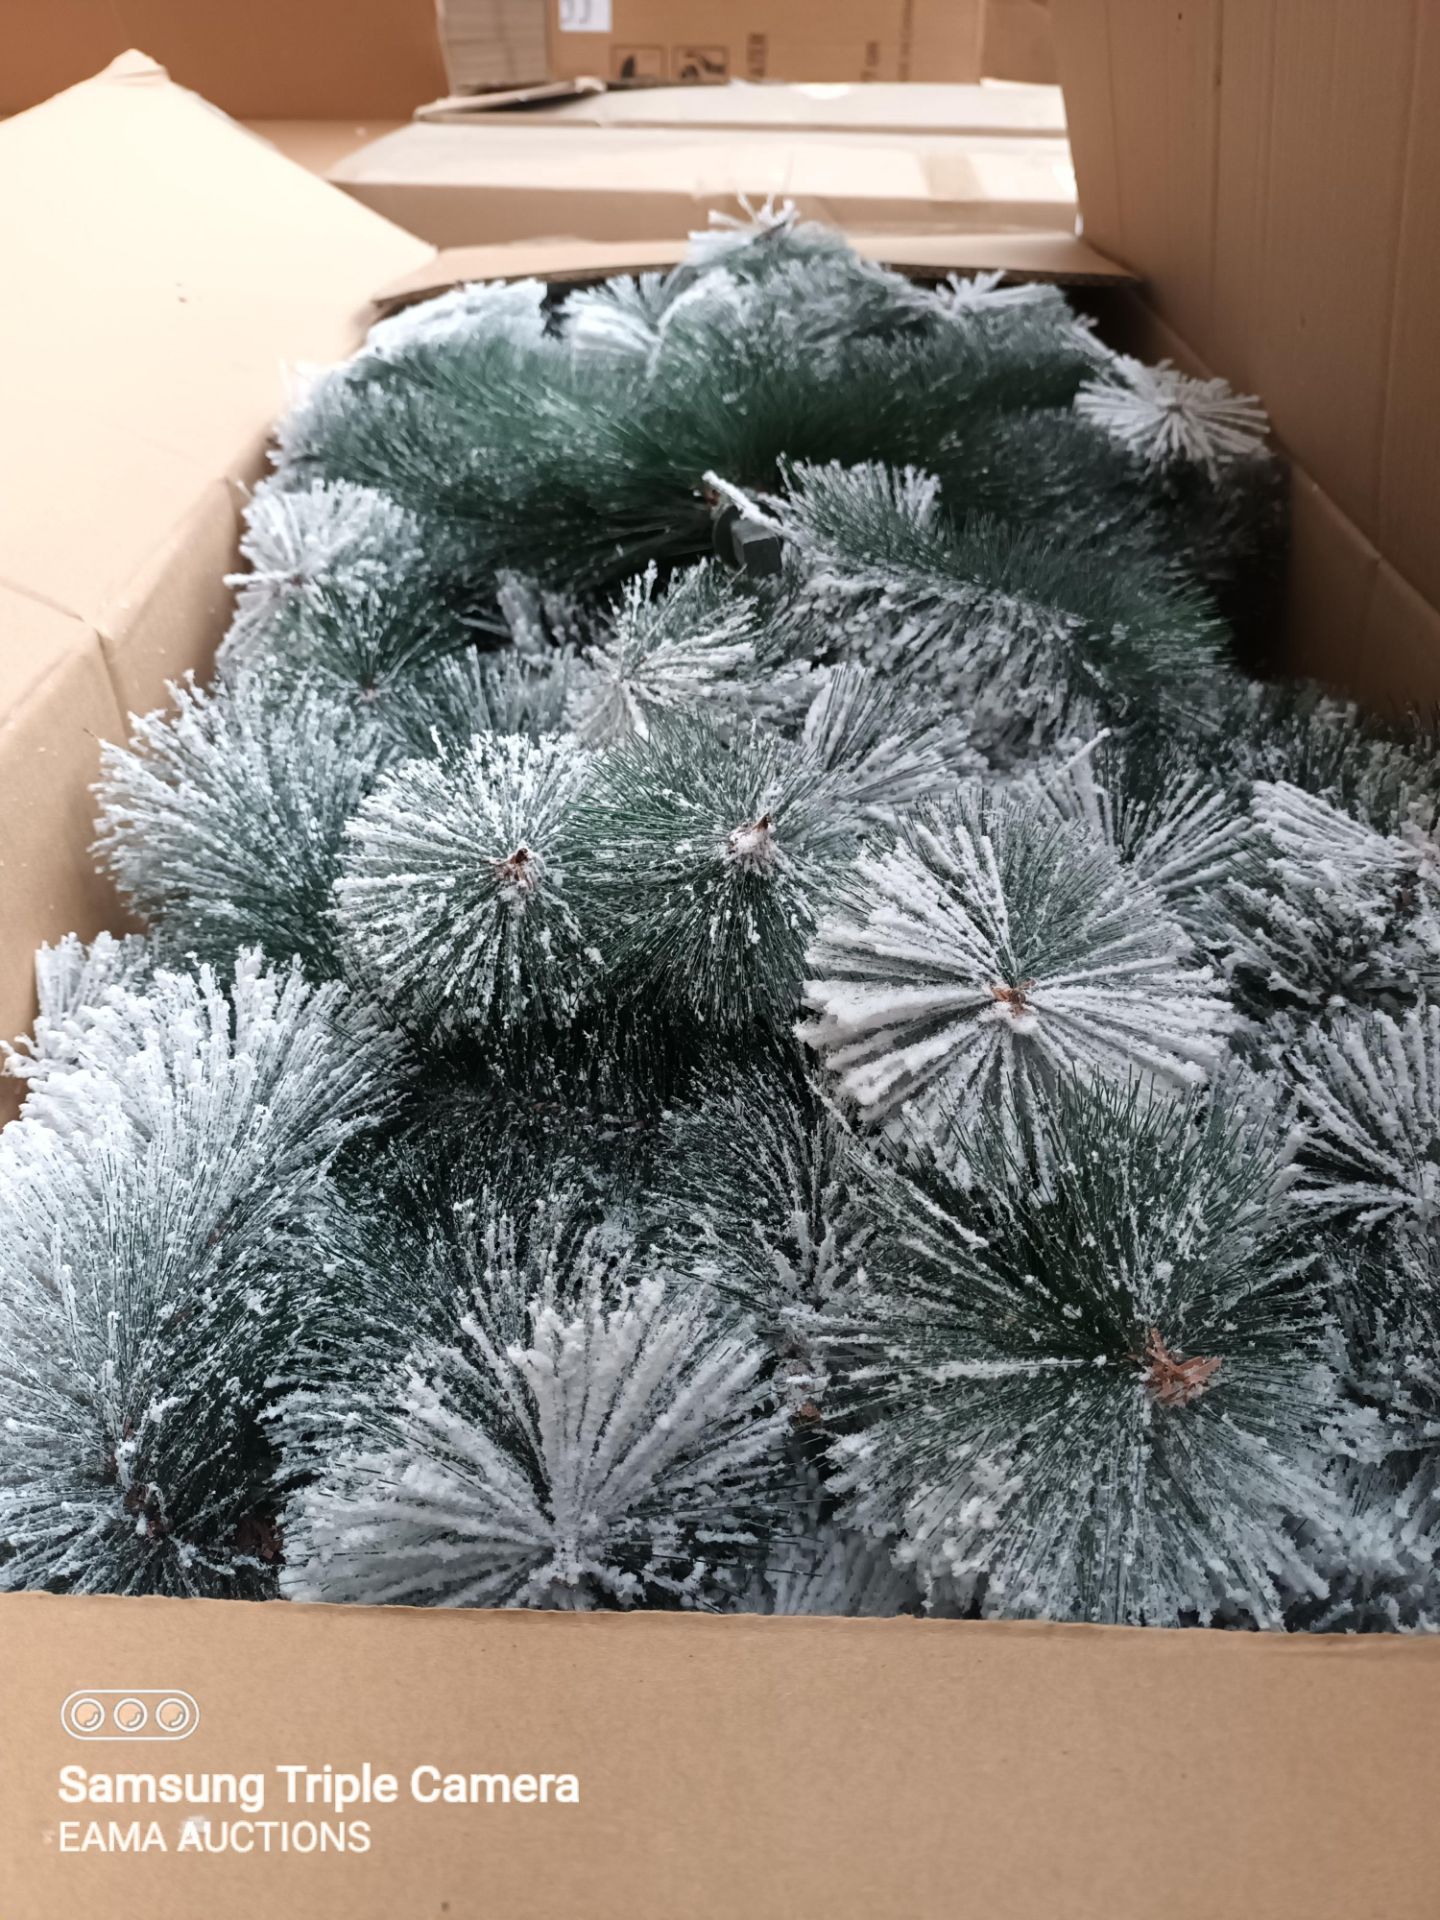 (L160) - 1 PALLET CONTAINING APPROX 6 BRAND NEW ARTIFICIAL XMAS TREES SNOW EFFECT